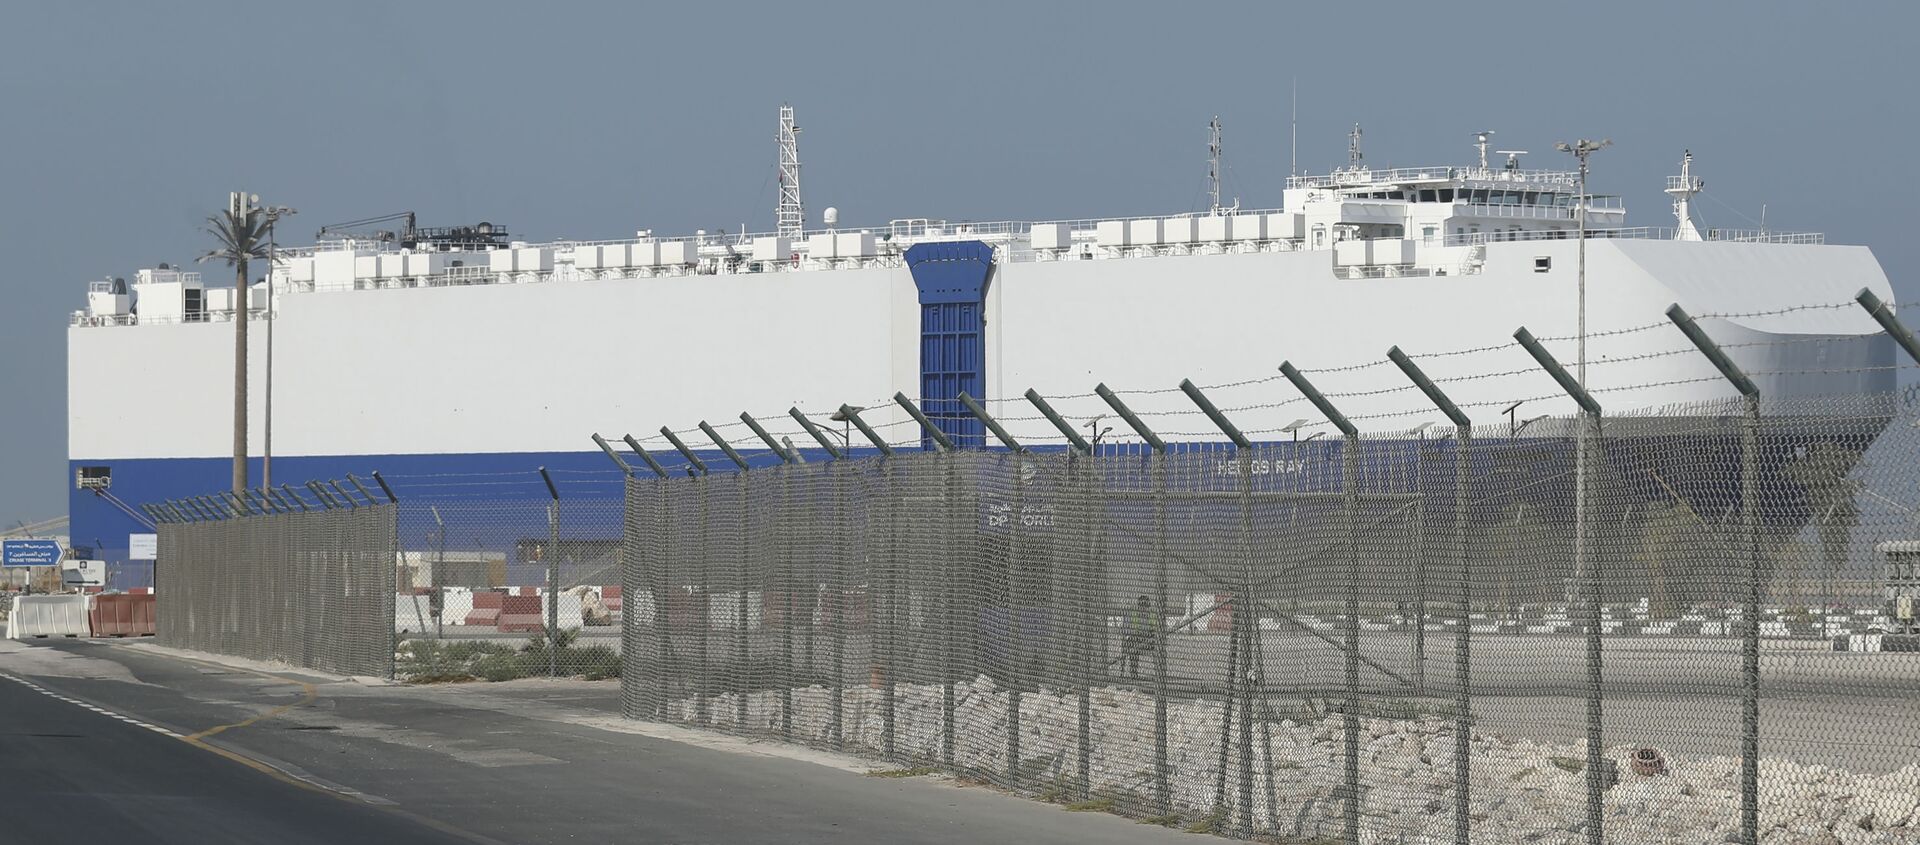 The Israeli-owned cargo ship, Helios Ray, sits docked in port after arriving earlier in Dubai, United Arab Emirates, Sunday, Feb. 28, 2021. The ship has been damaged by an unexplained blast at the gulf of Oman on Thursday - Sputnik International, 1920, 01.03.2021